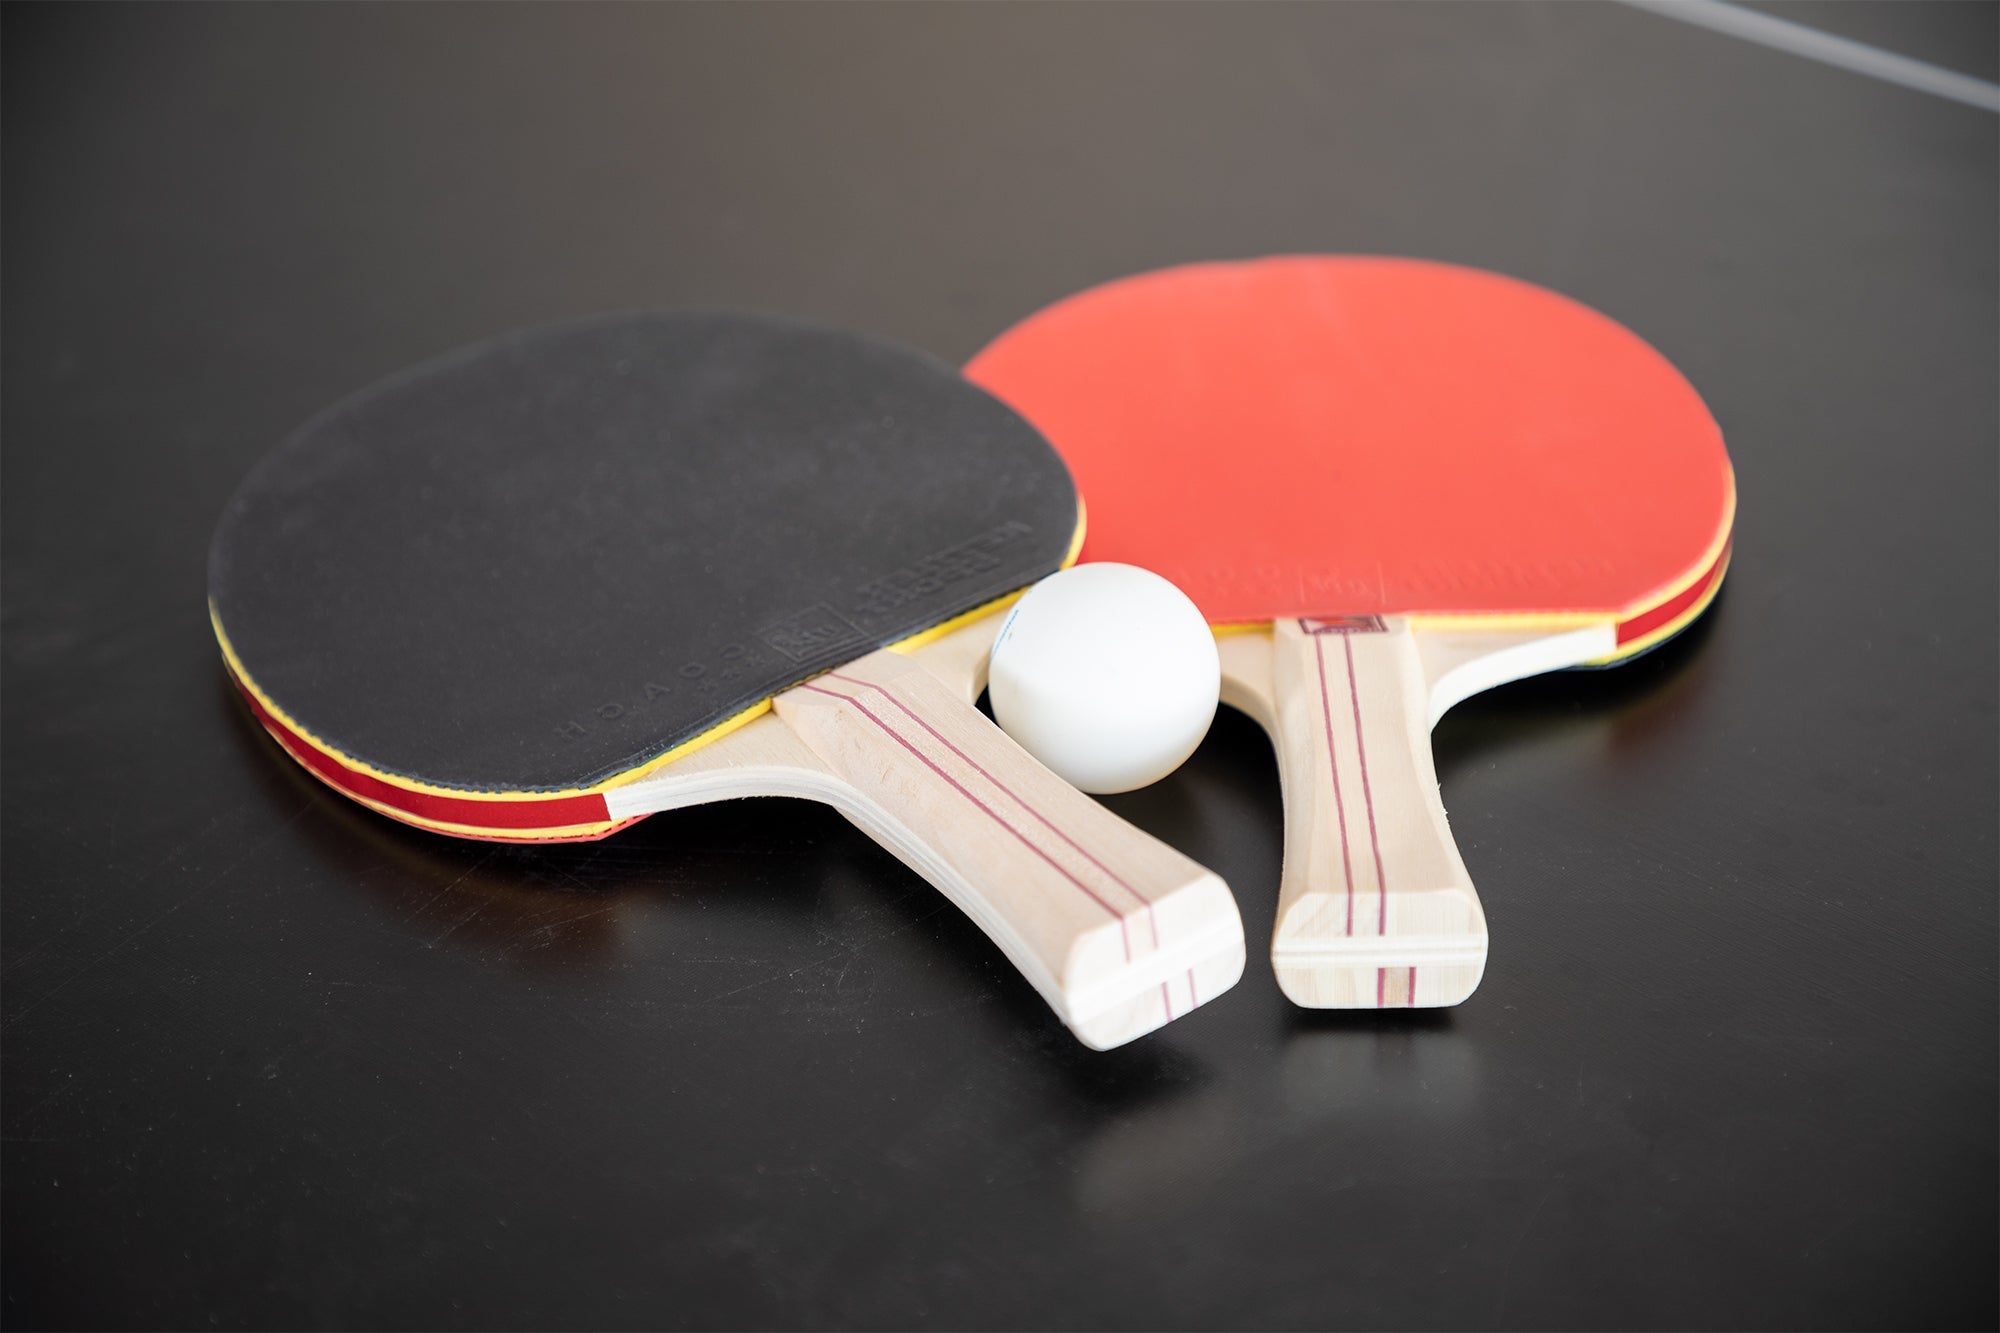 PING PONG ACCESSORIES